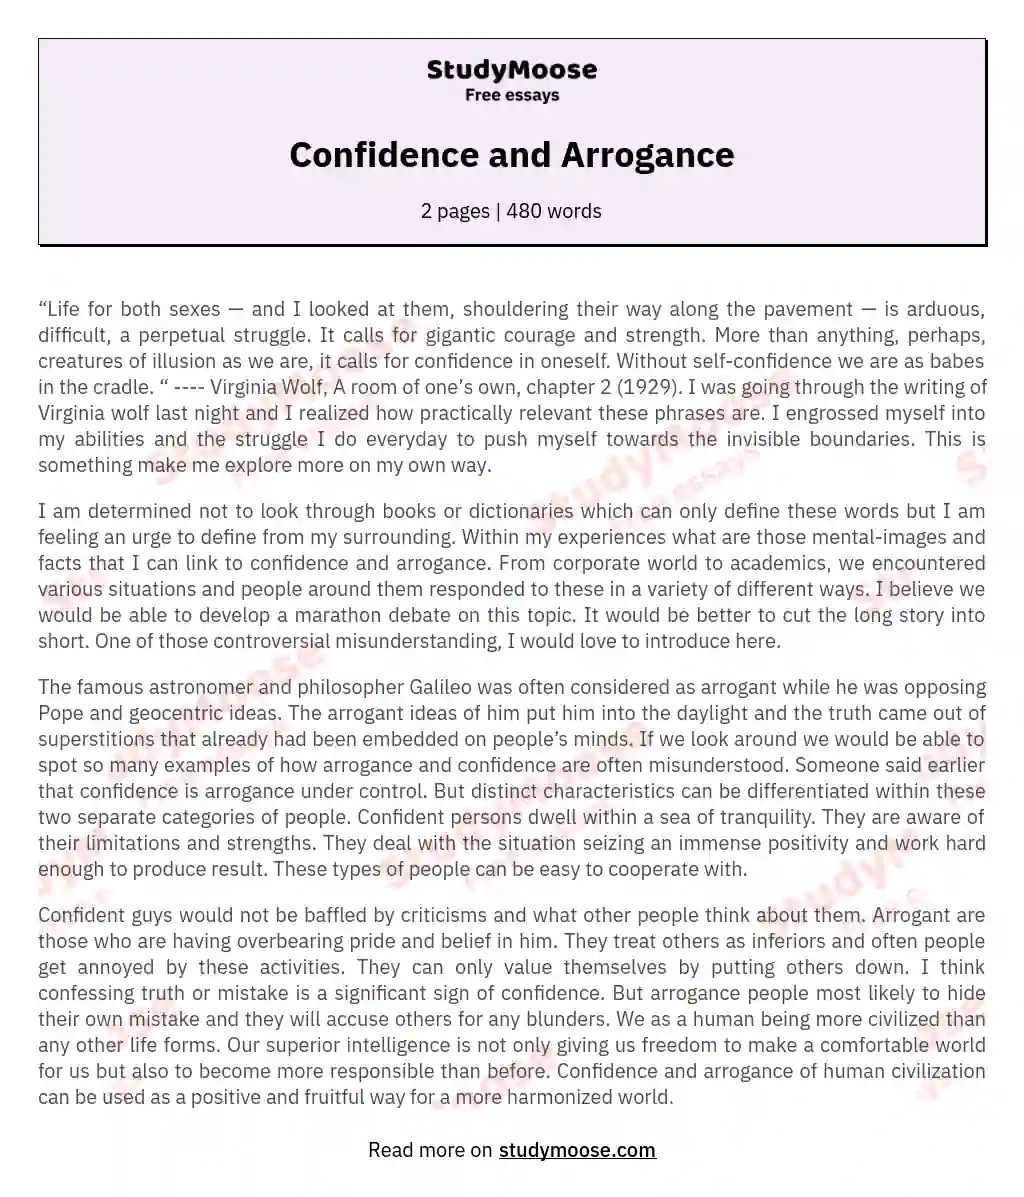 Confidence and Arrogance essay